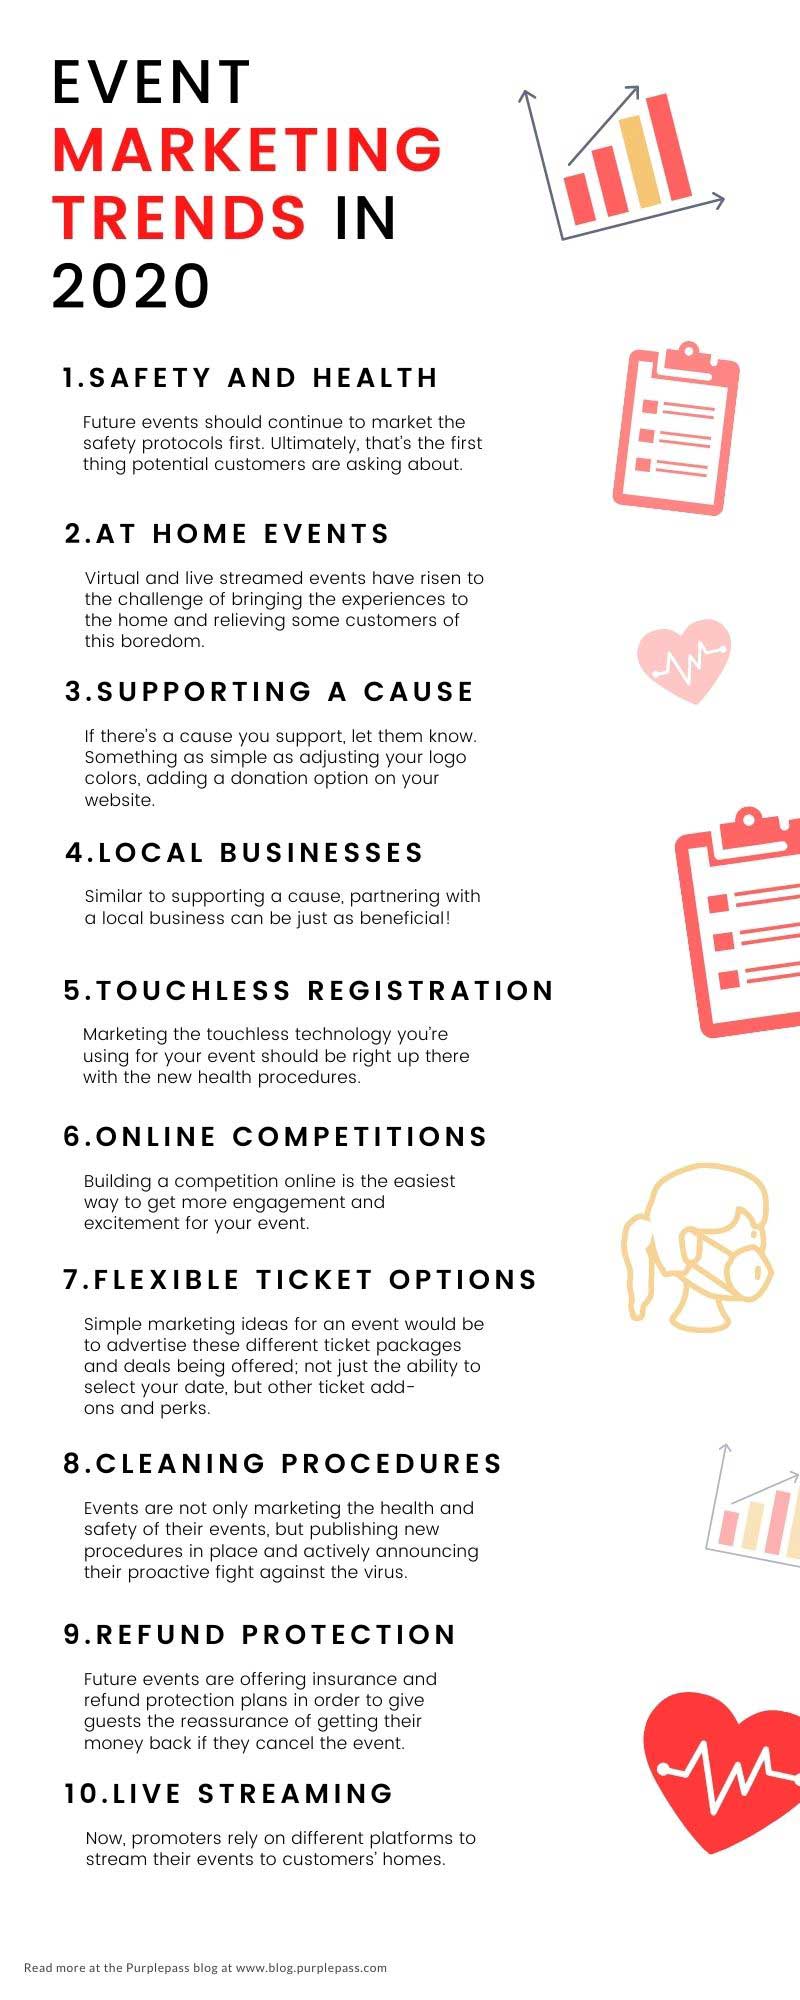 infographic on event marketing trends in 2020